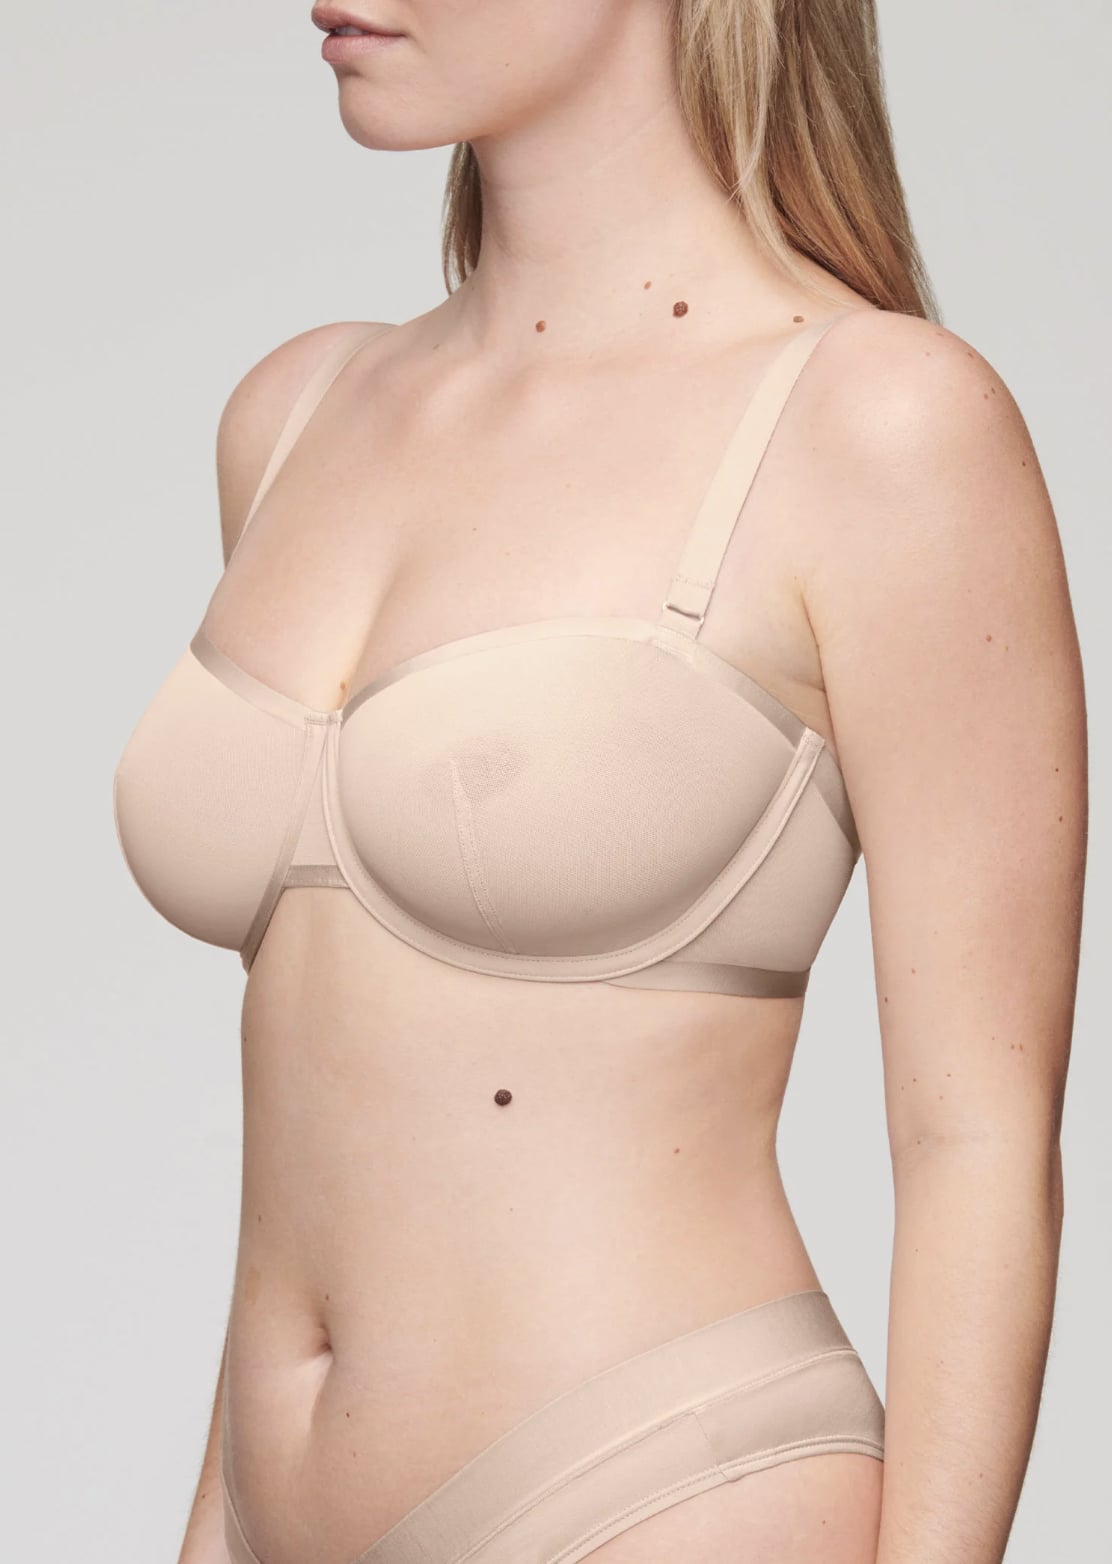 The 20 Best Bras for Small Chests